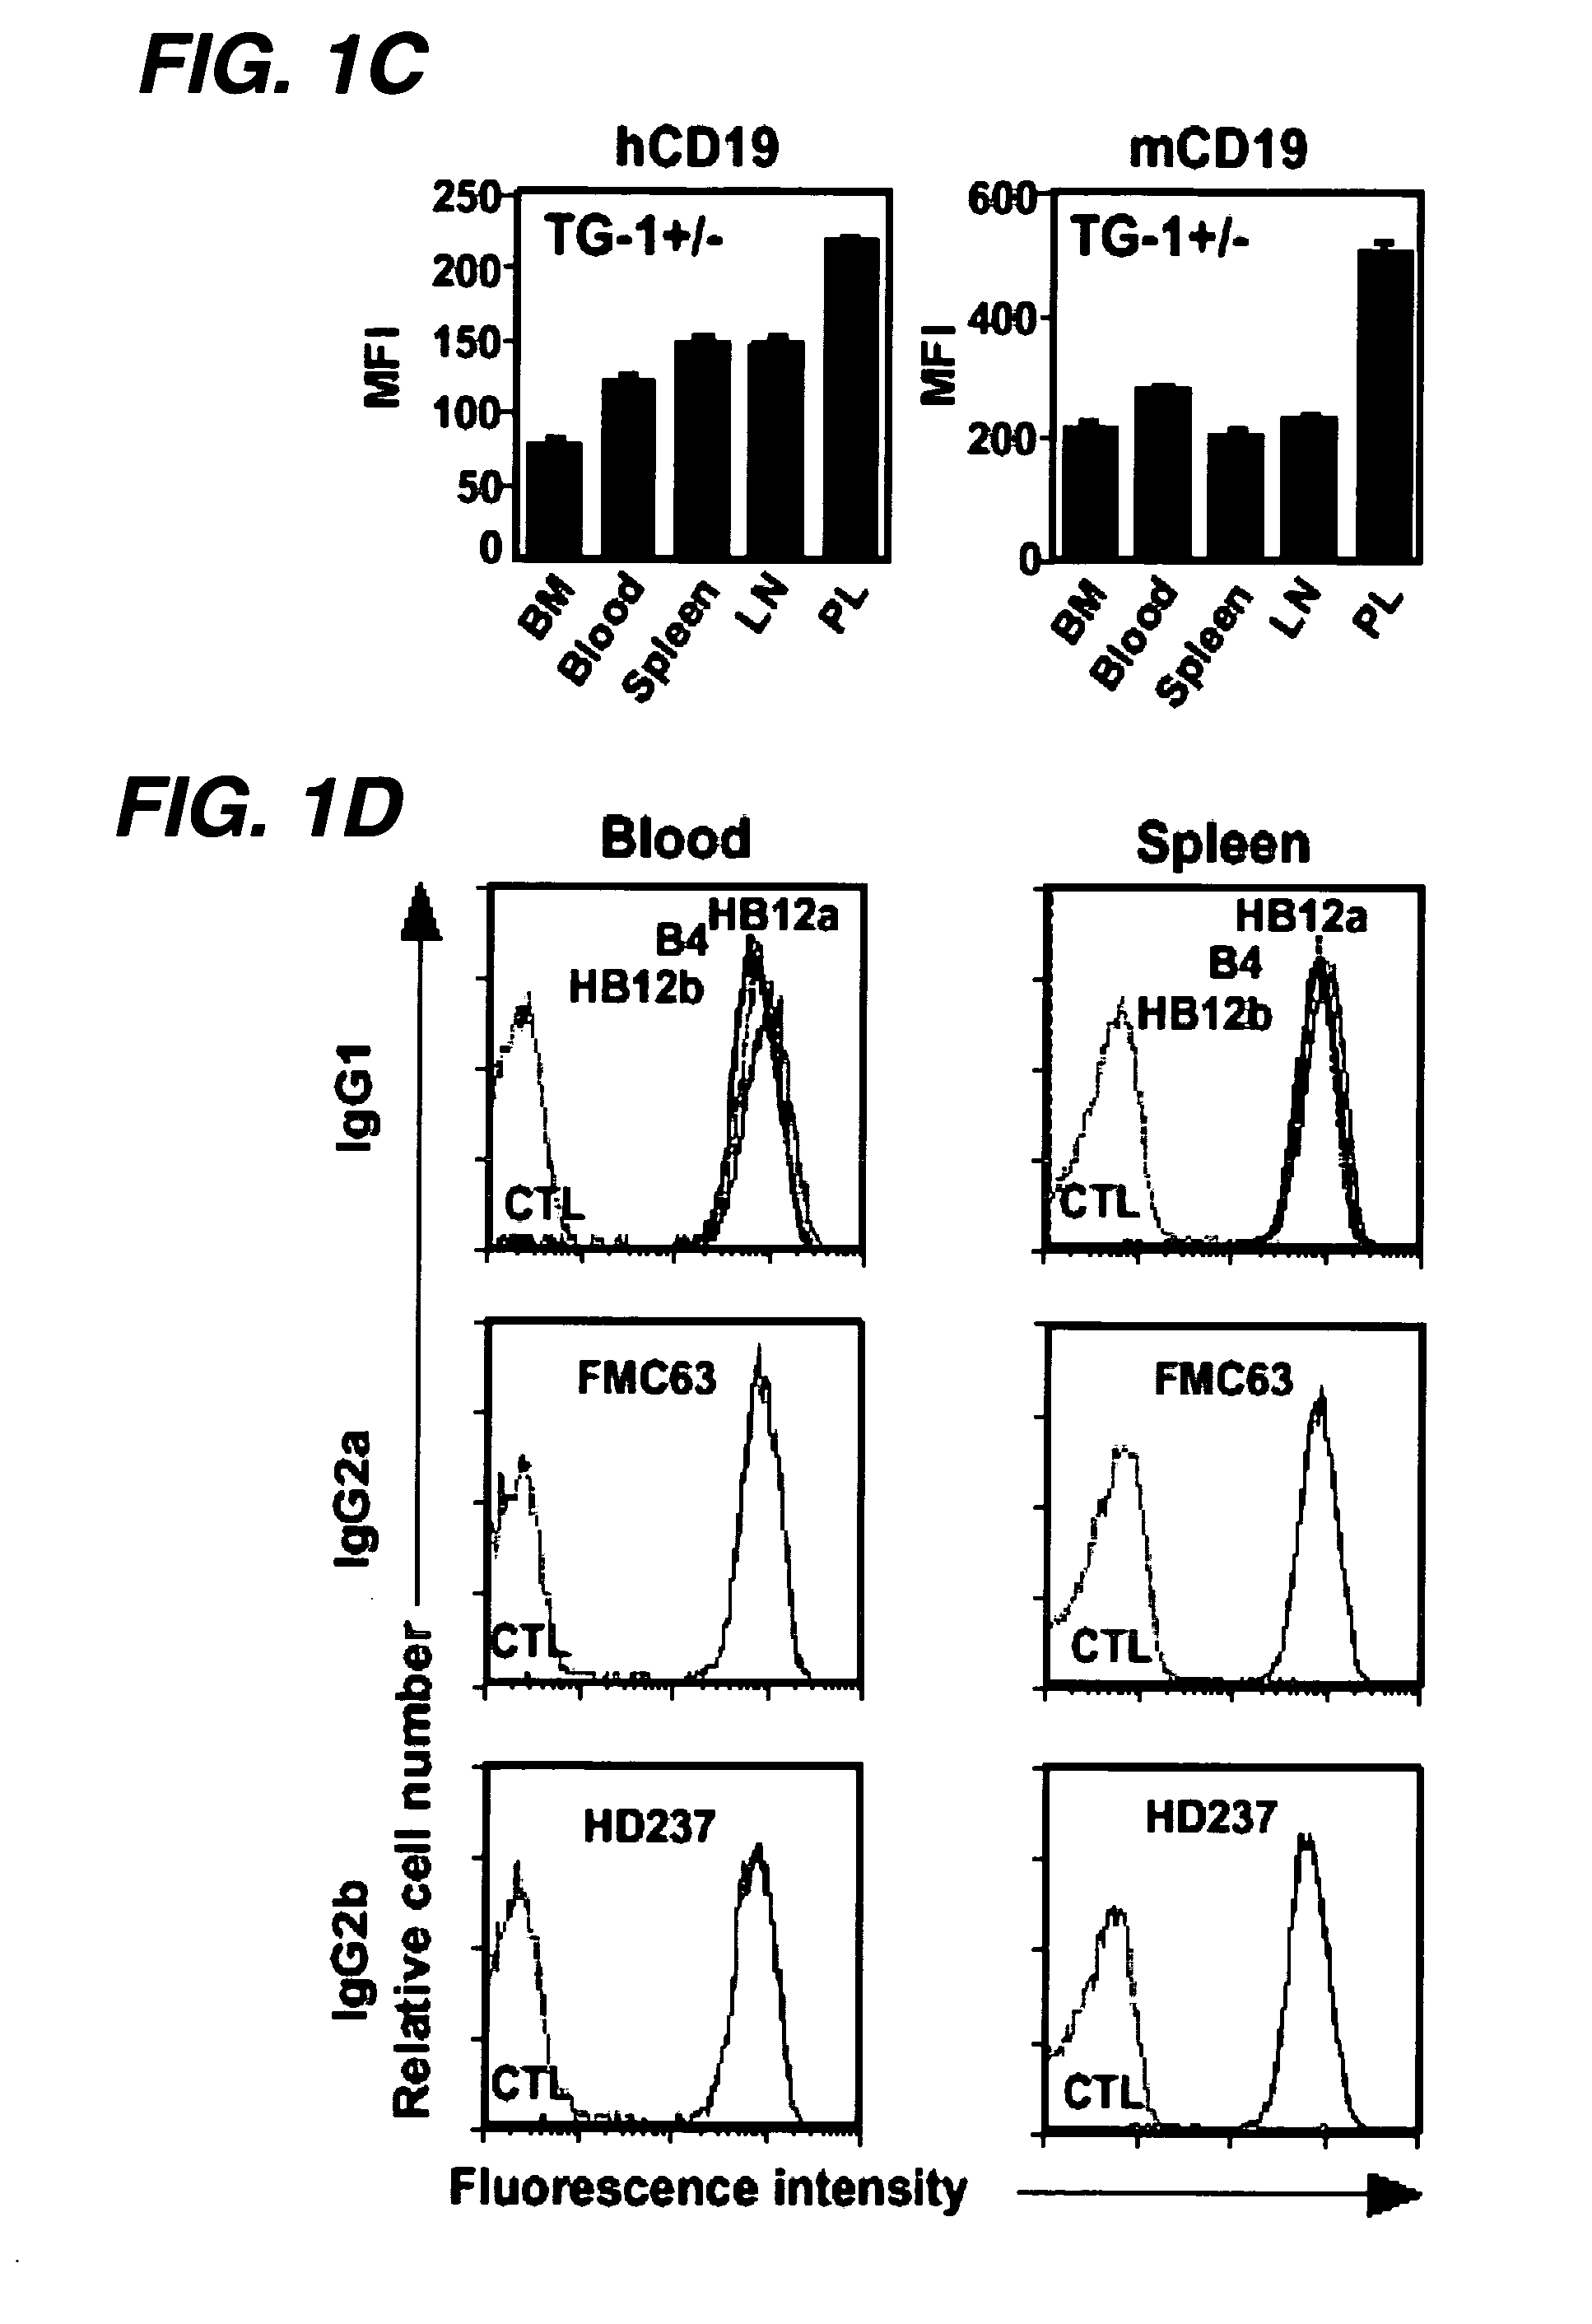 Anti-CD19 antibodies and uses in oncology